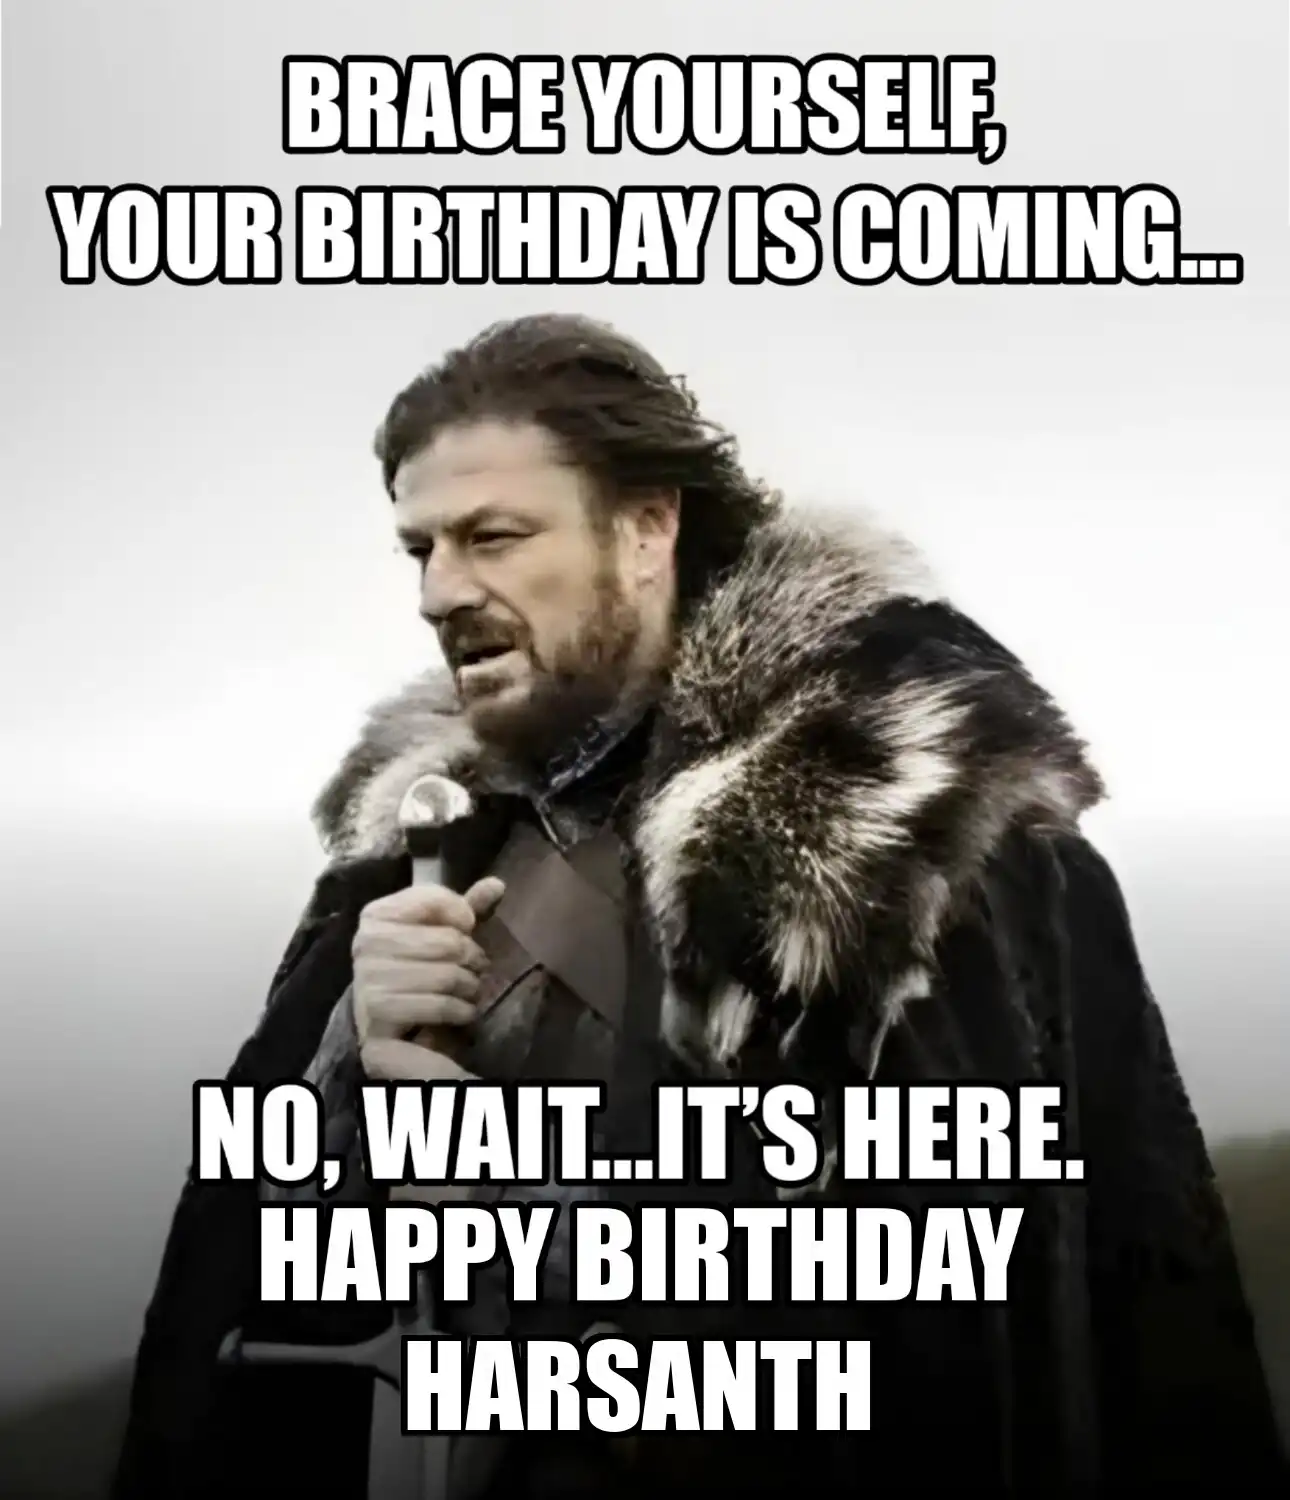 Happy Birthday Harsanth Brace Yourself Your Birthday Is Coming Meme